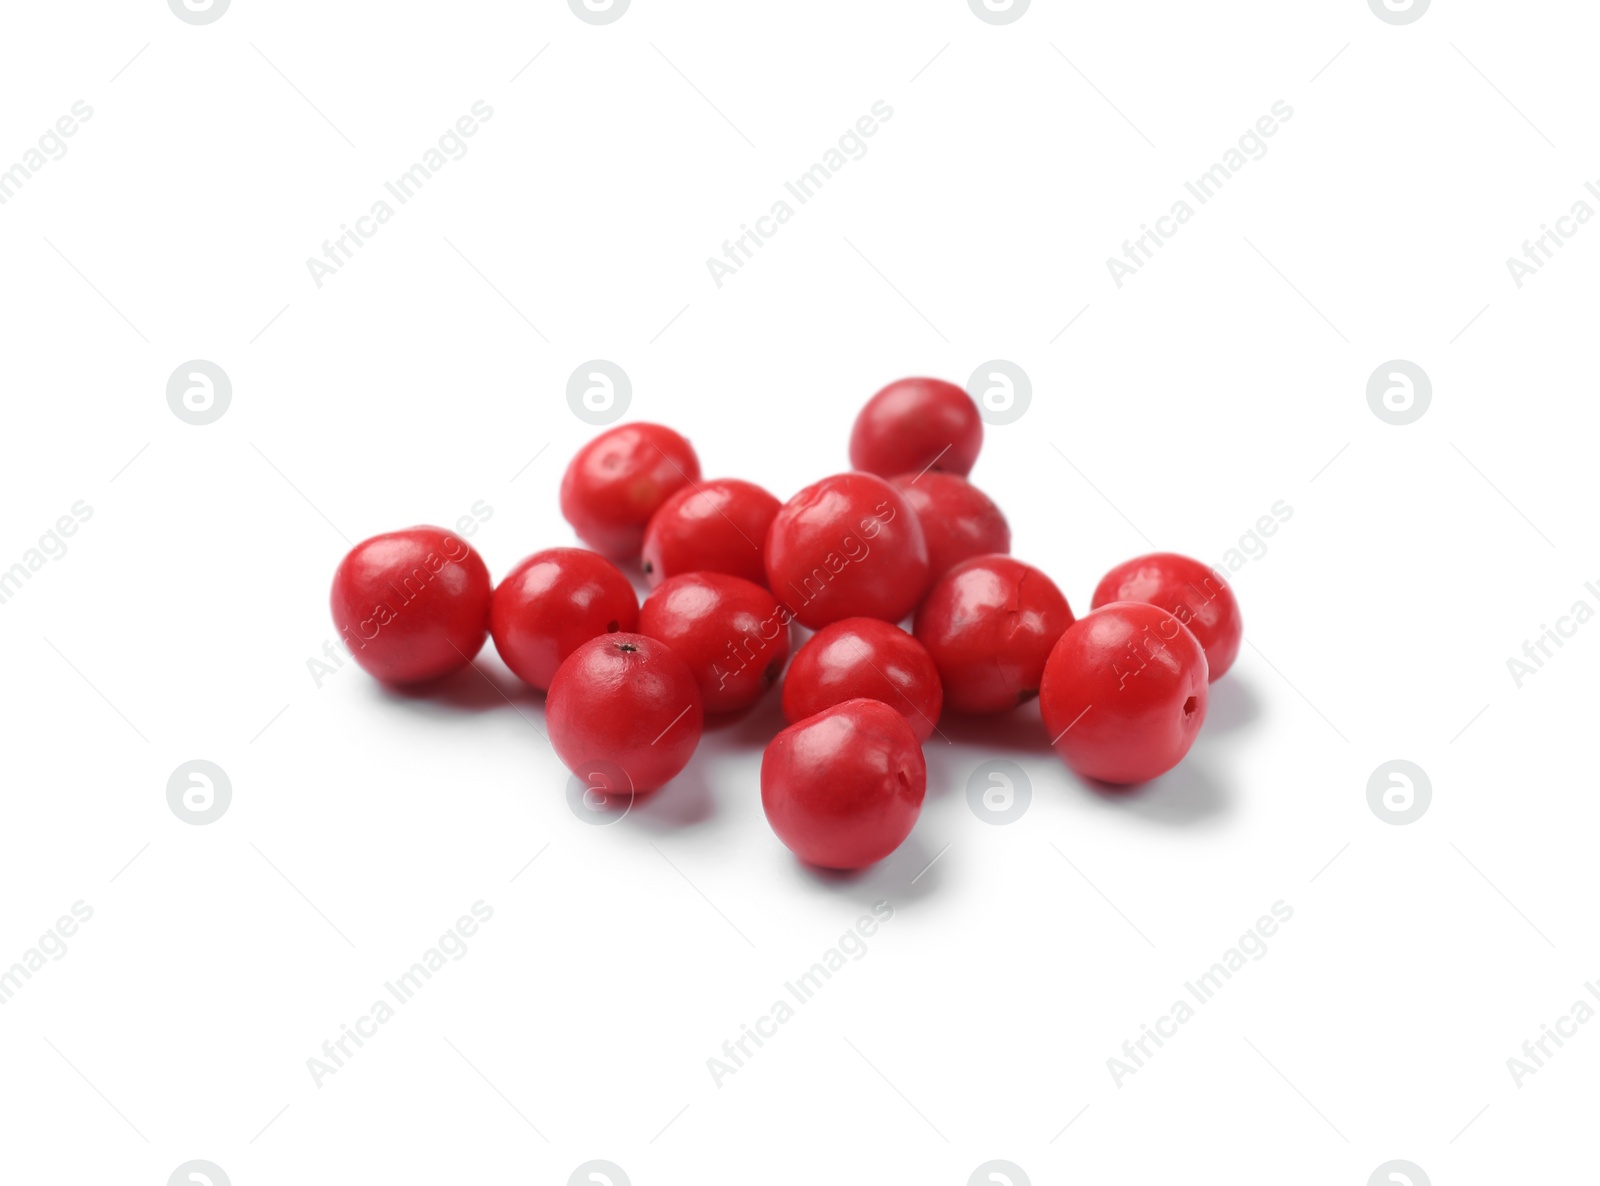 Photo of Aromatic spice. Many red peppercorns isolated on white